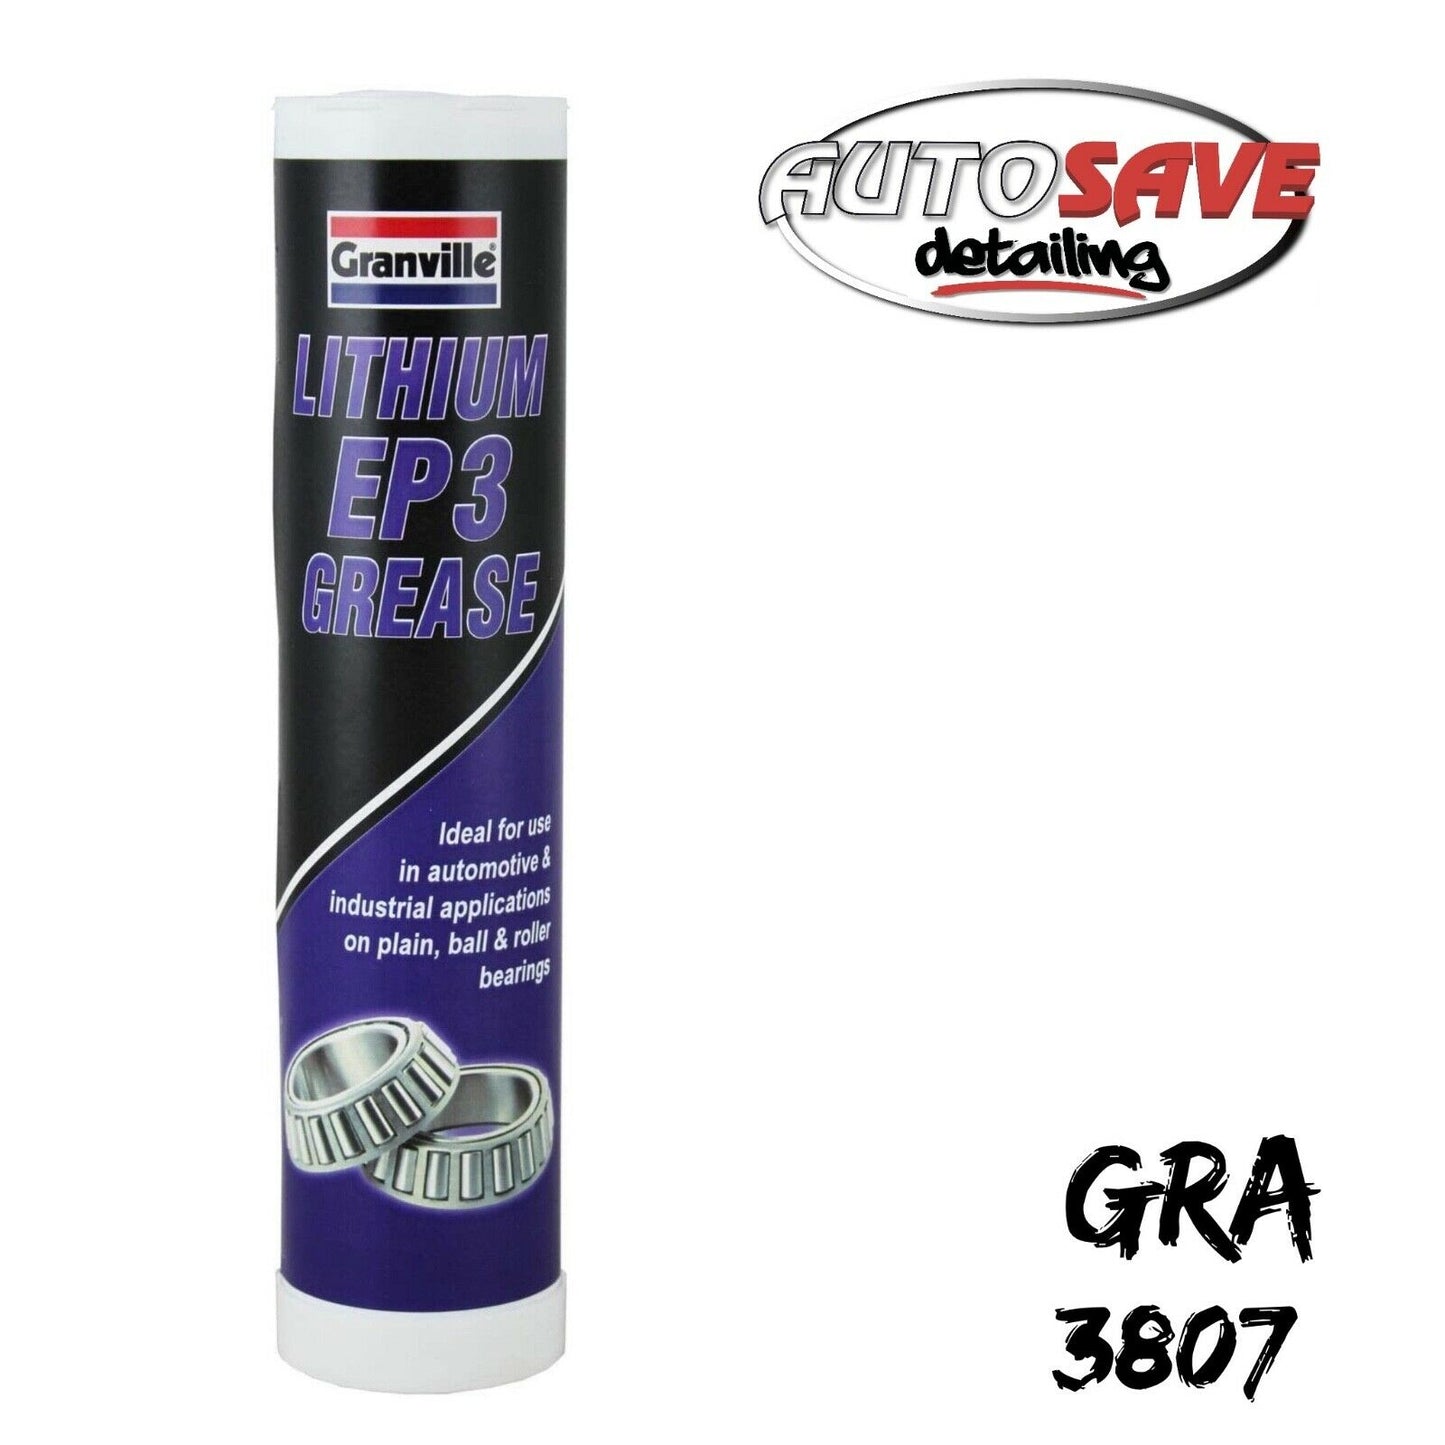 Granville Lithium Grease EP3 Lubricant Water Resistant Cartridge 400g